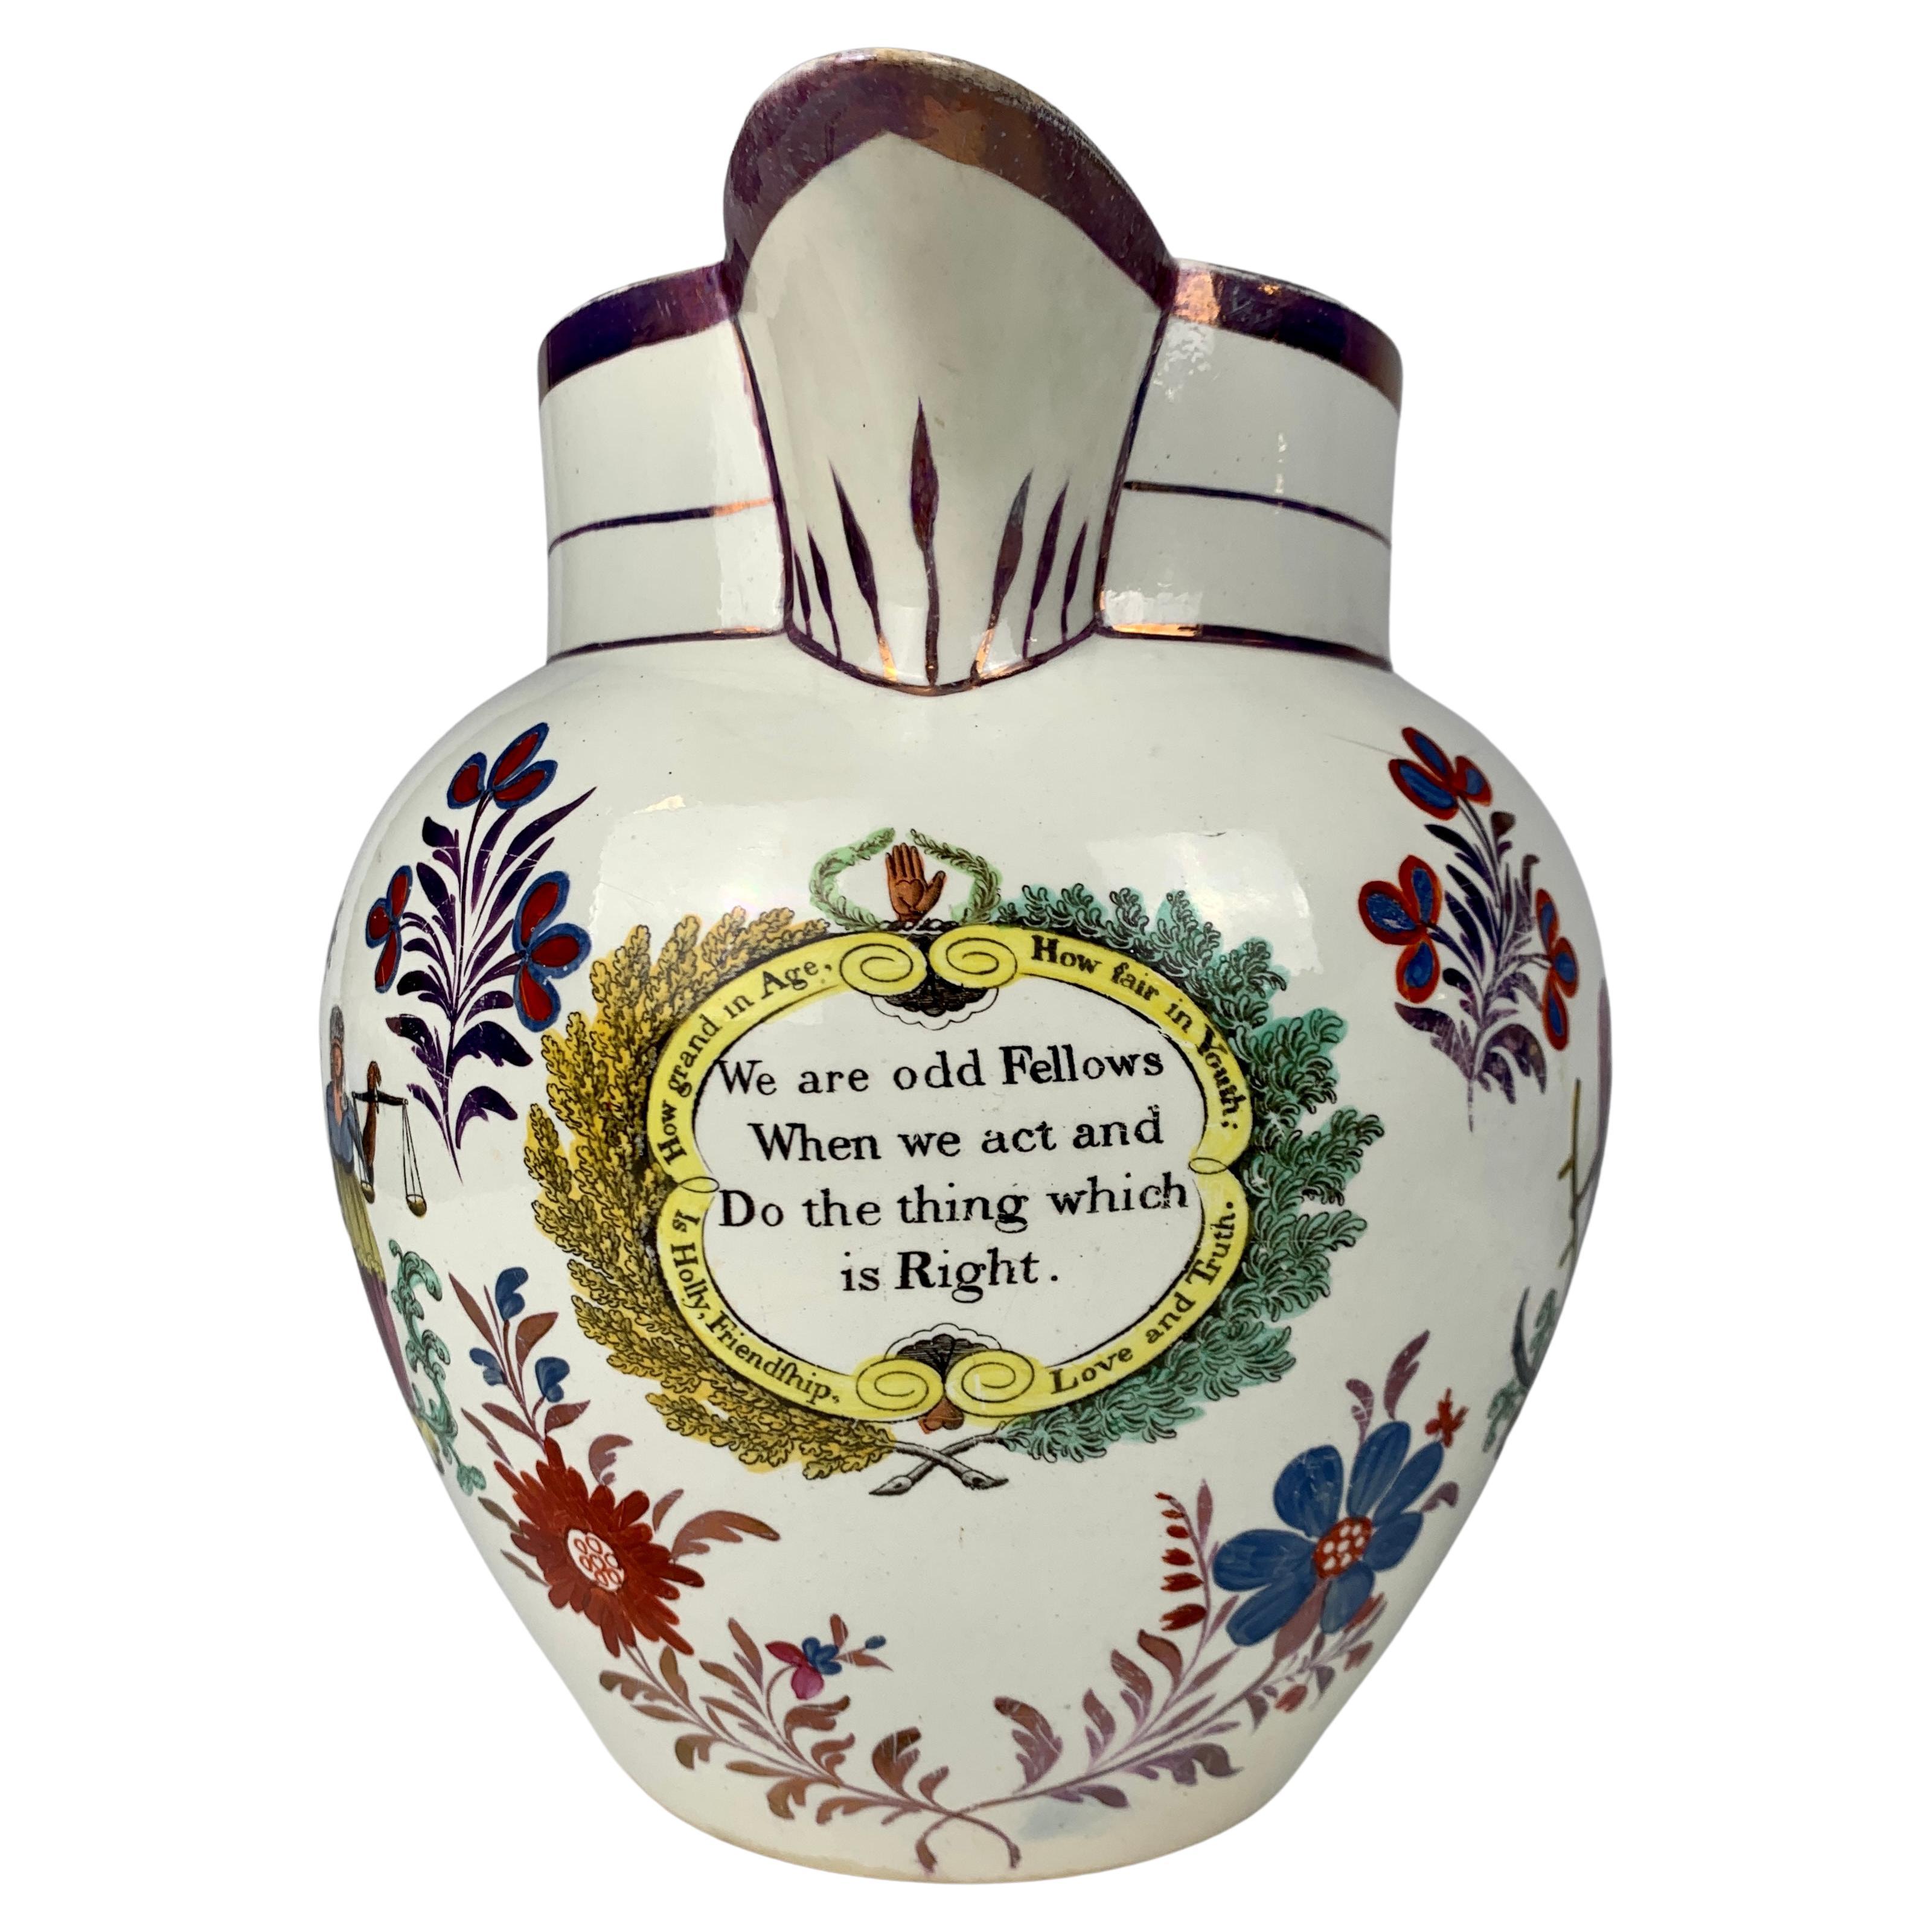 This massive and rare pitcher is fully decorated with the imagery and symbols of the Odd Fellows (see images). Odd Fellows promote philanthropy, the ethic of reciprocity, and charity. 
At the front of the pitcher, we see a panel with the words, 